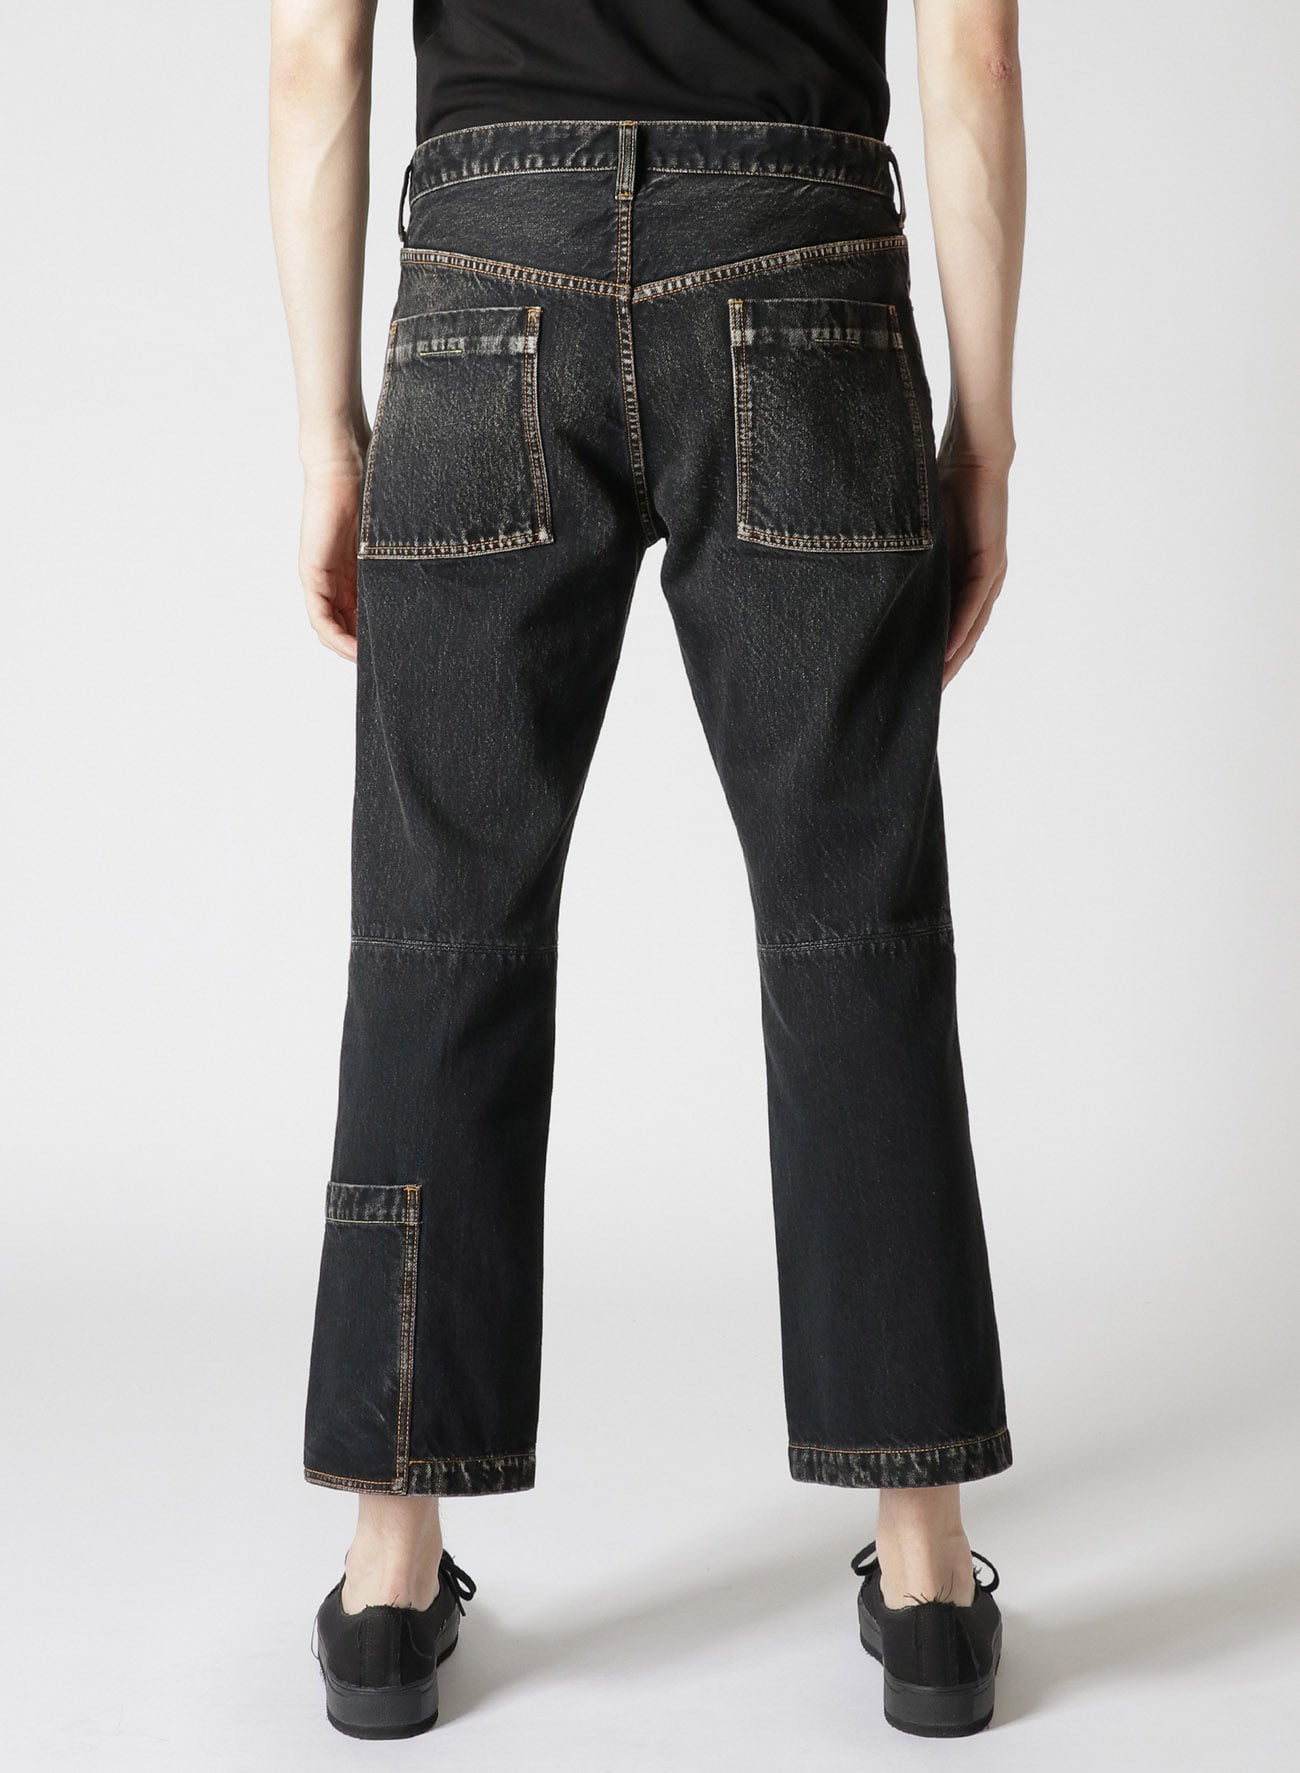 SP.BK DENIM MW I-LEFT HEM OUT PKT G-A(S Black): Vintage 1.1｜THE 